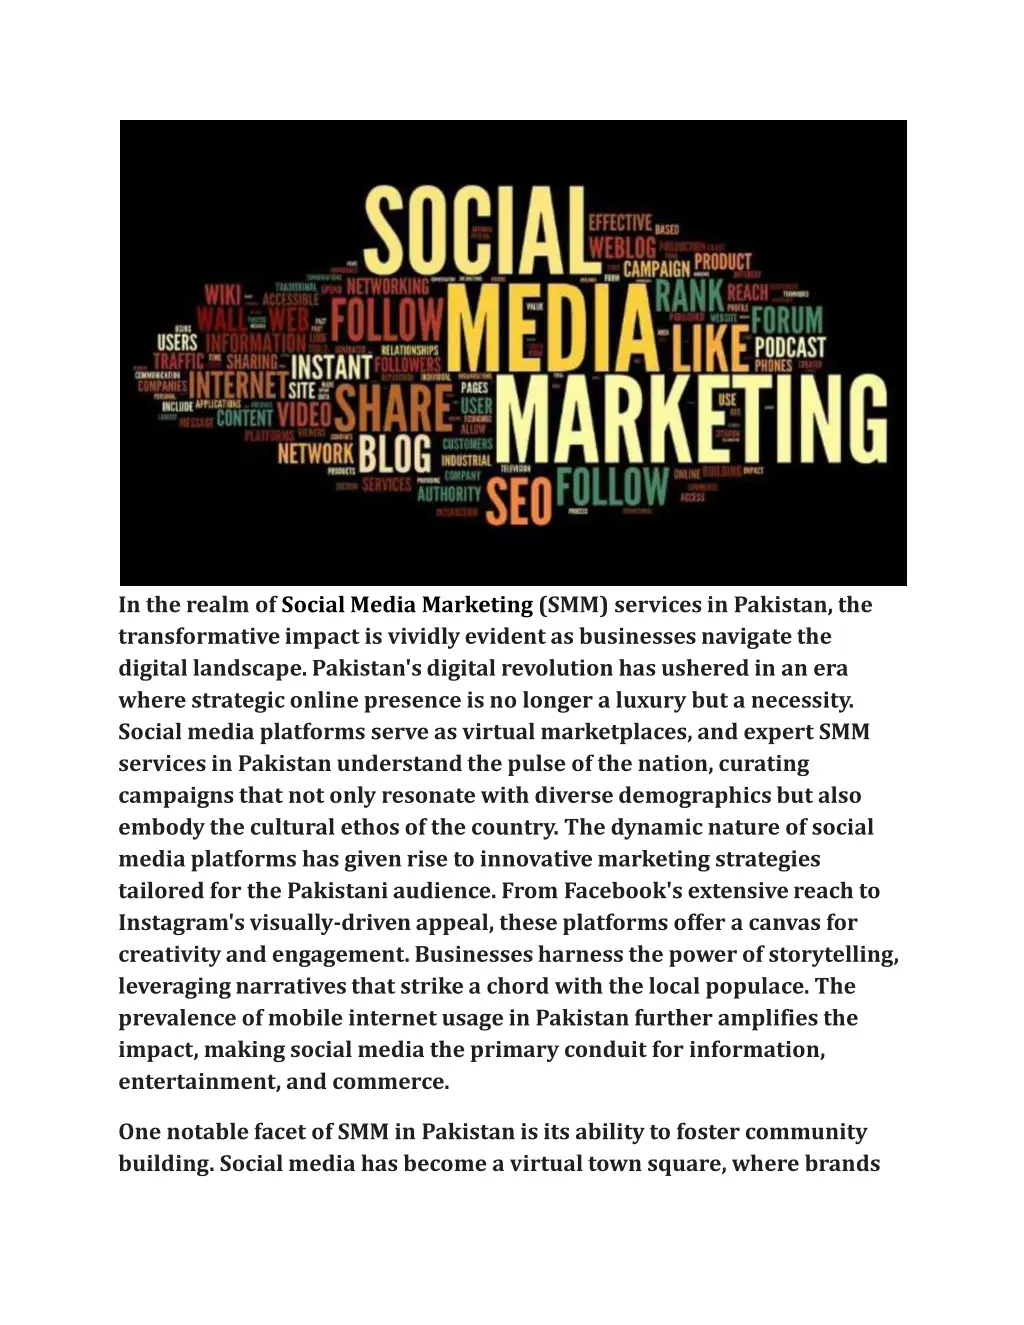 in the realm of social media marketing